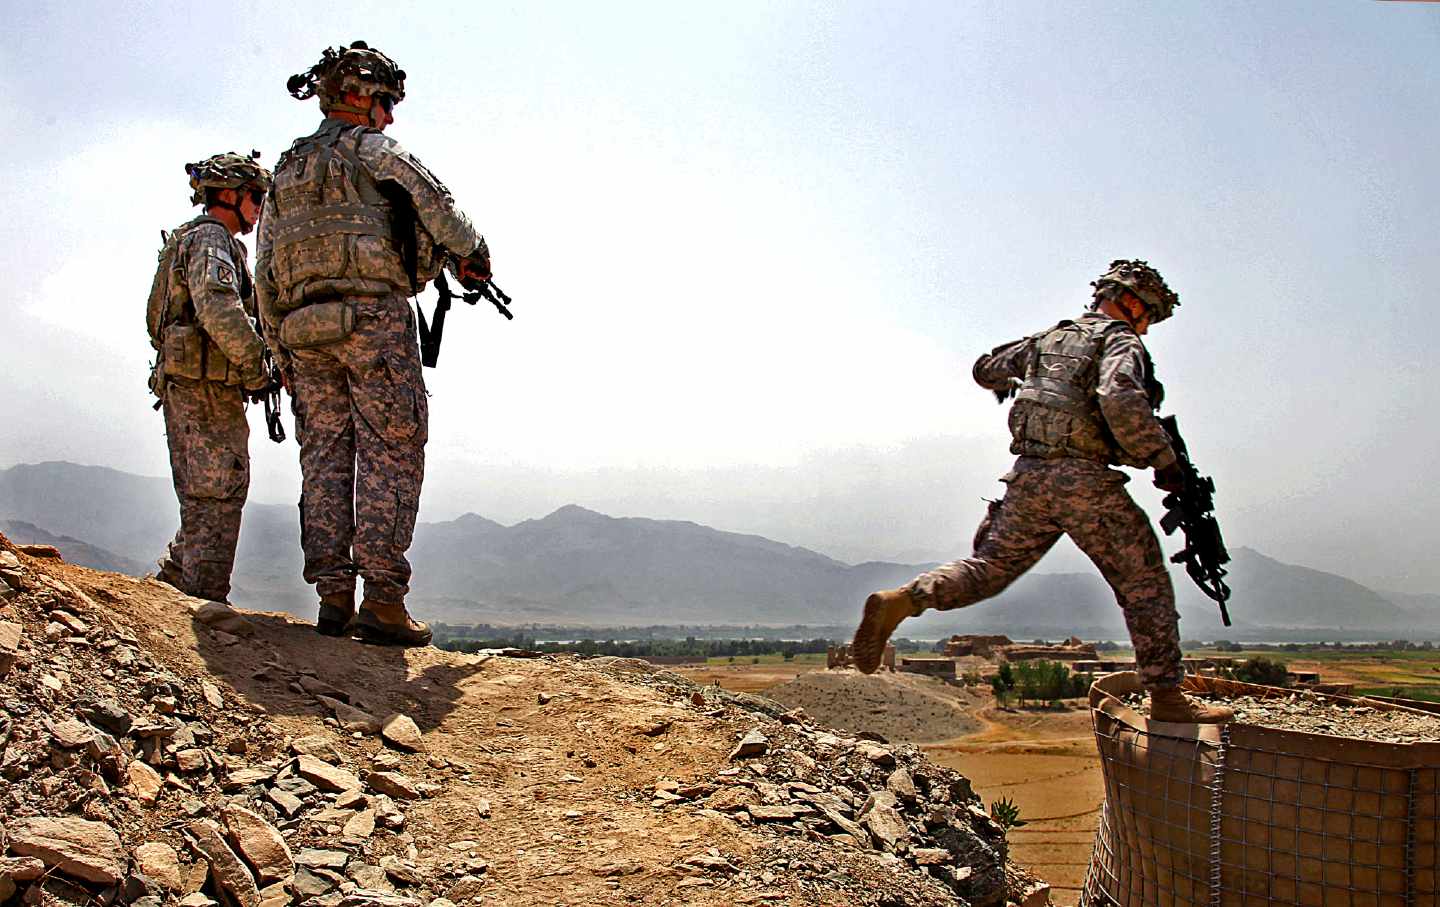 What Can We Learn From the War in Afghanistan?